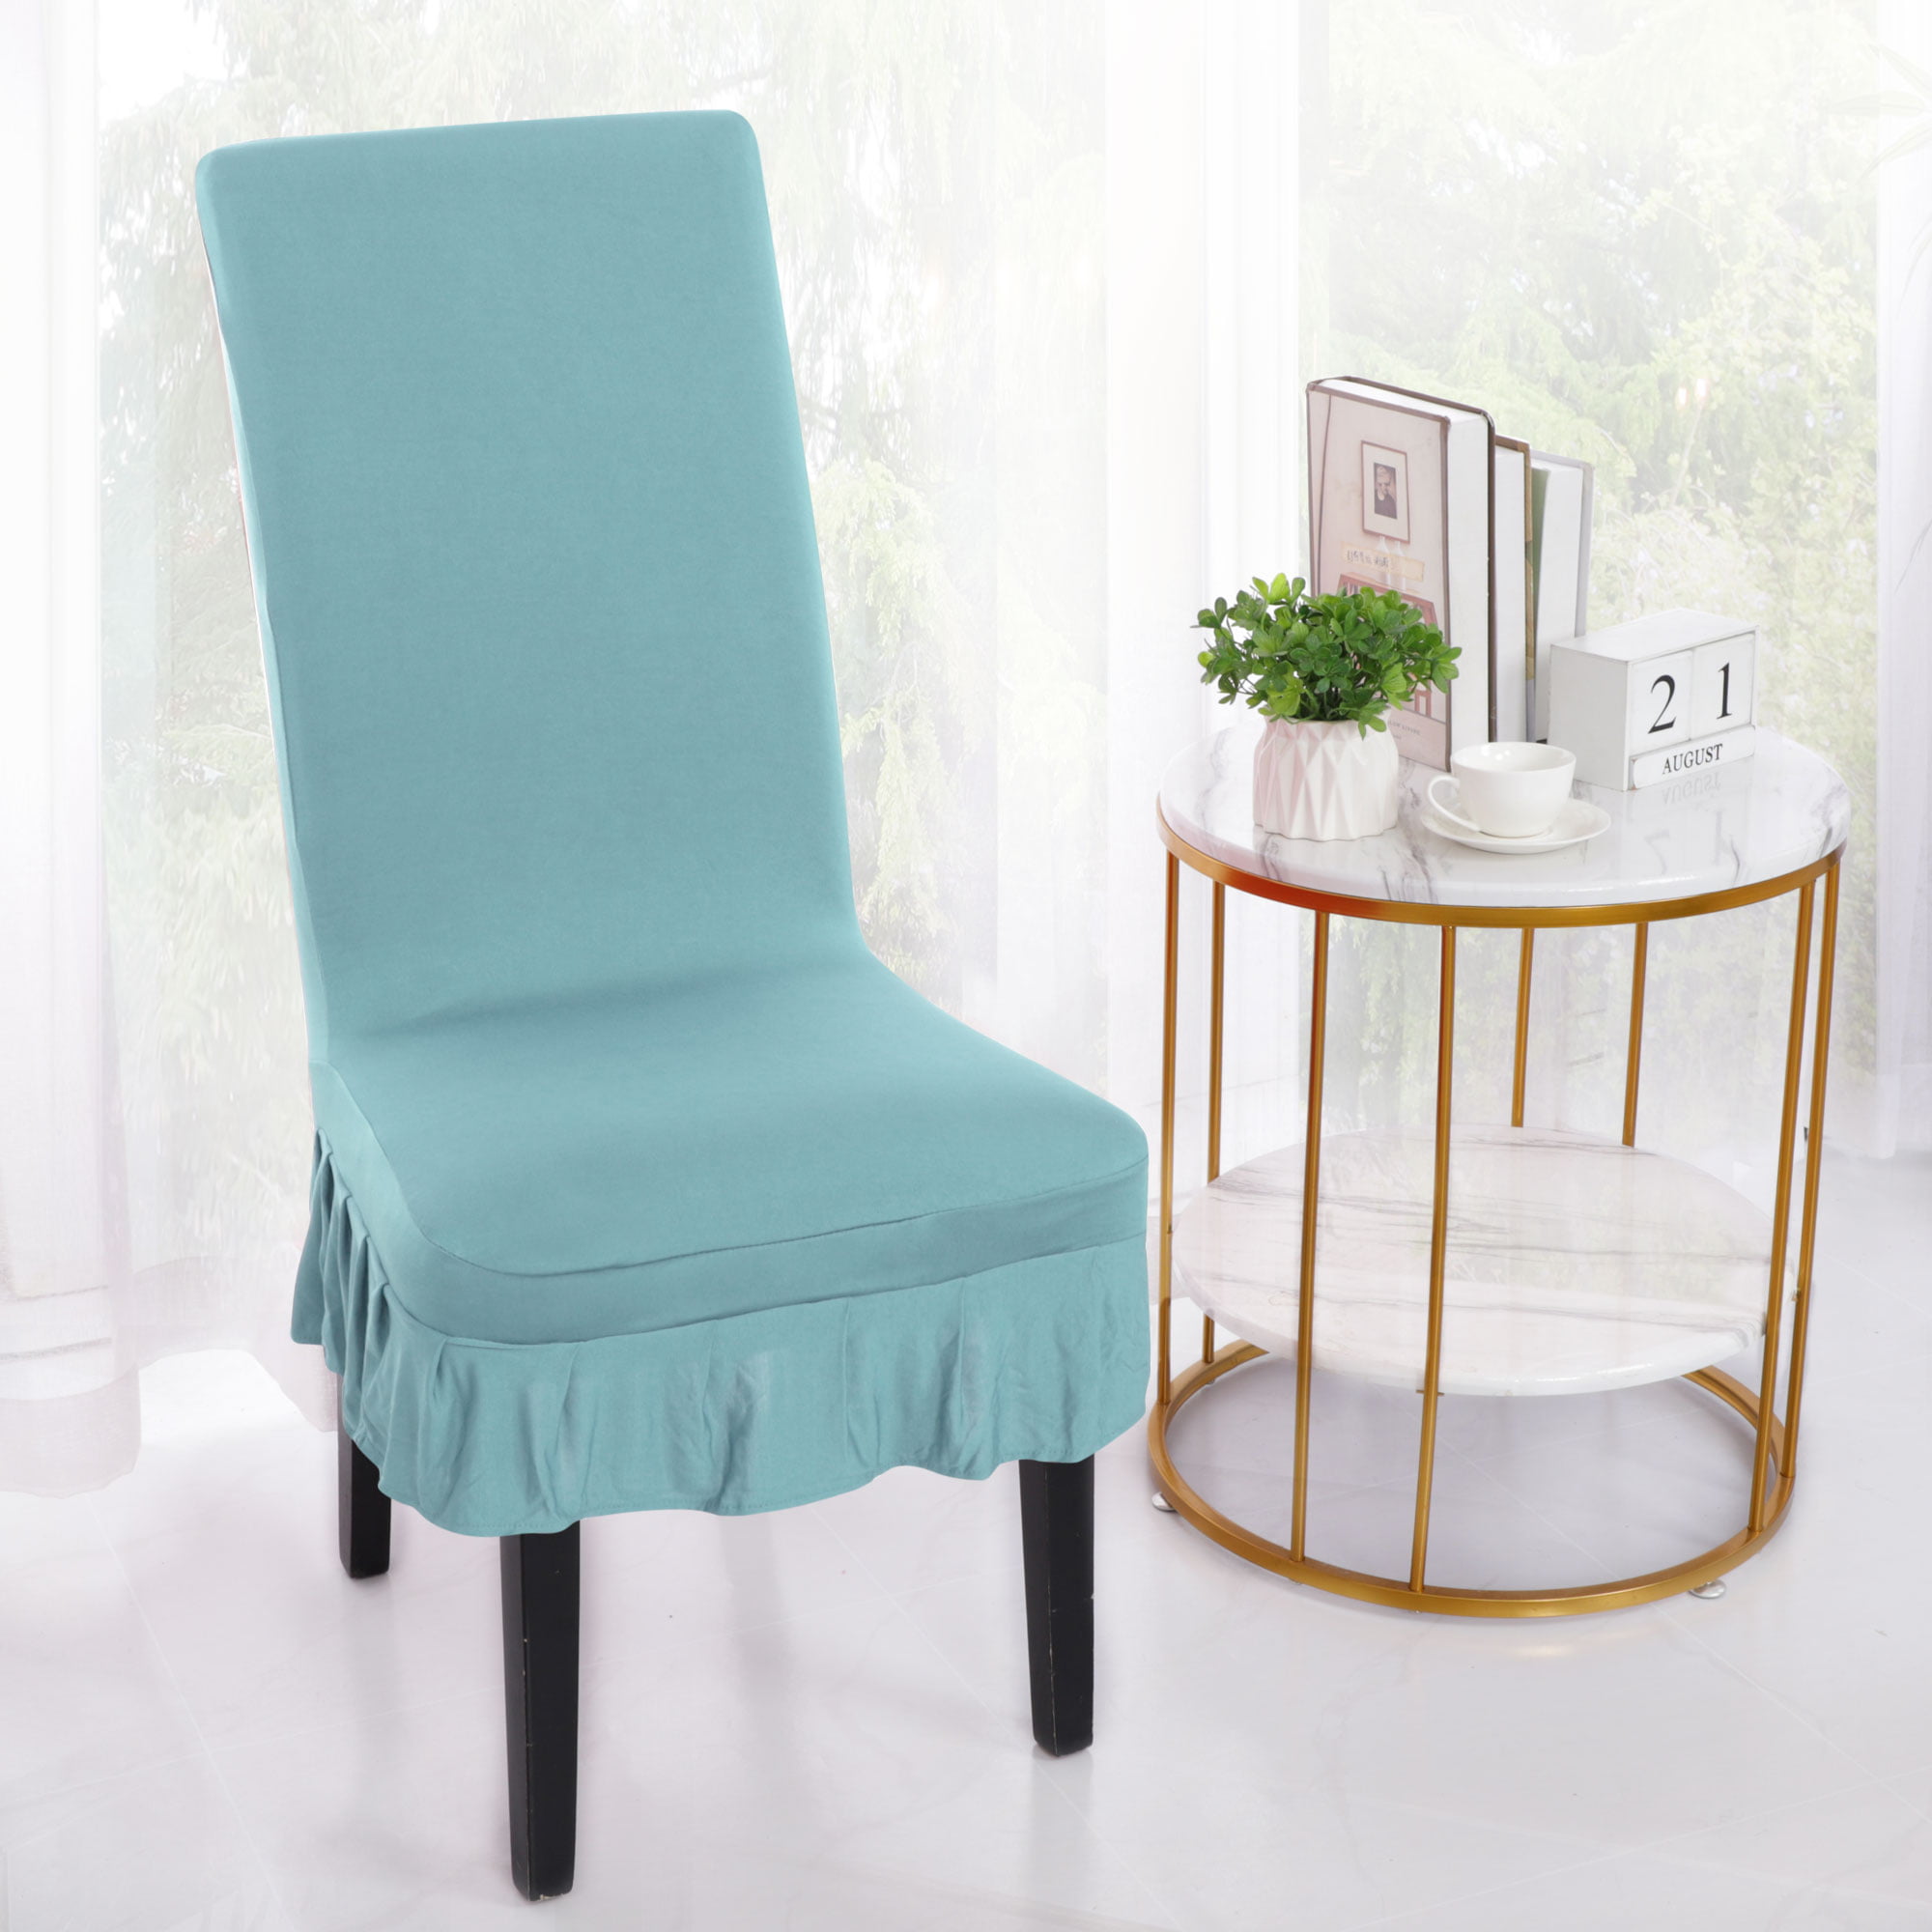 Spandex Stretch Dining Room Chair Cover Slipcover Seat Protector Light Blue